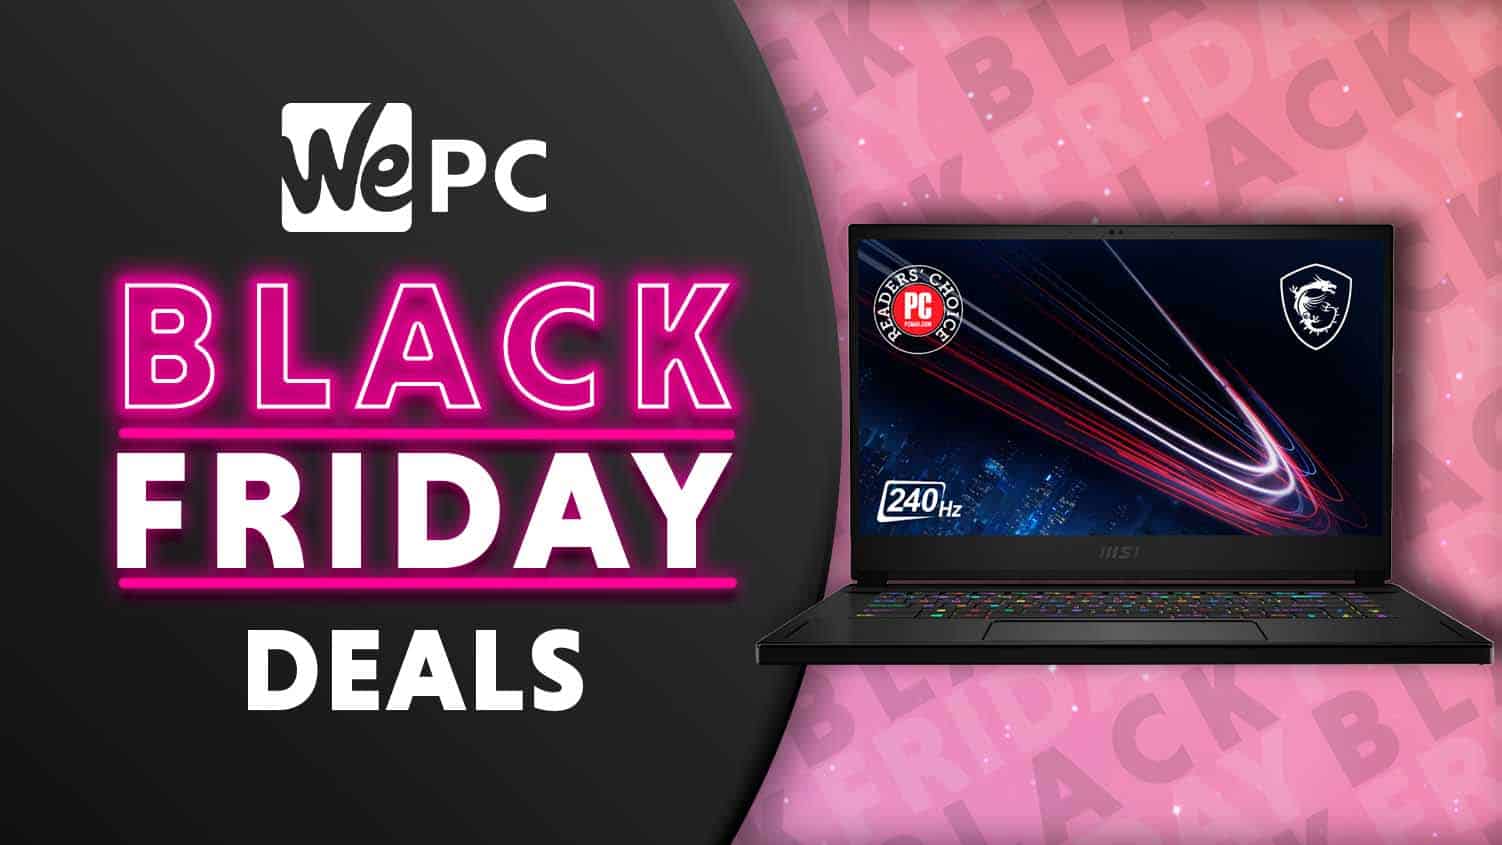 Save $150 on the MSI GS66 gaming laptop early Black Friday deal